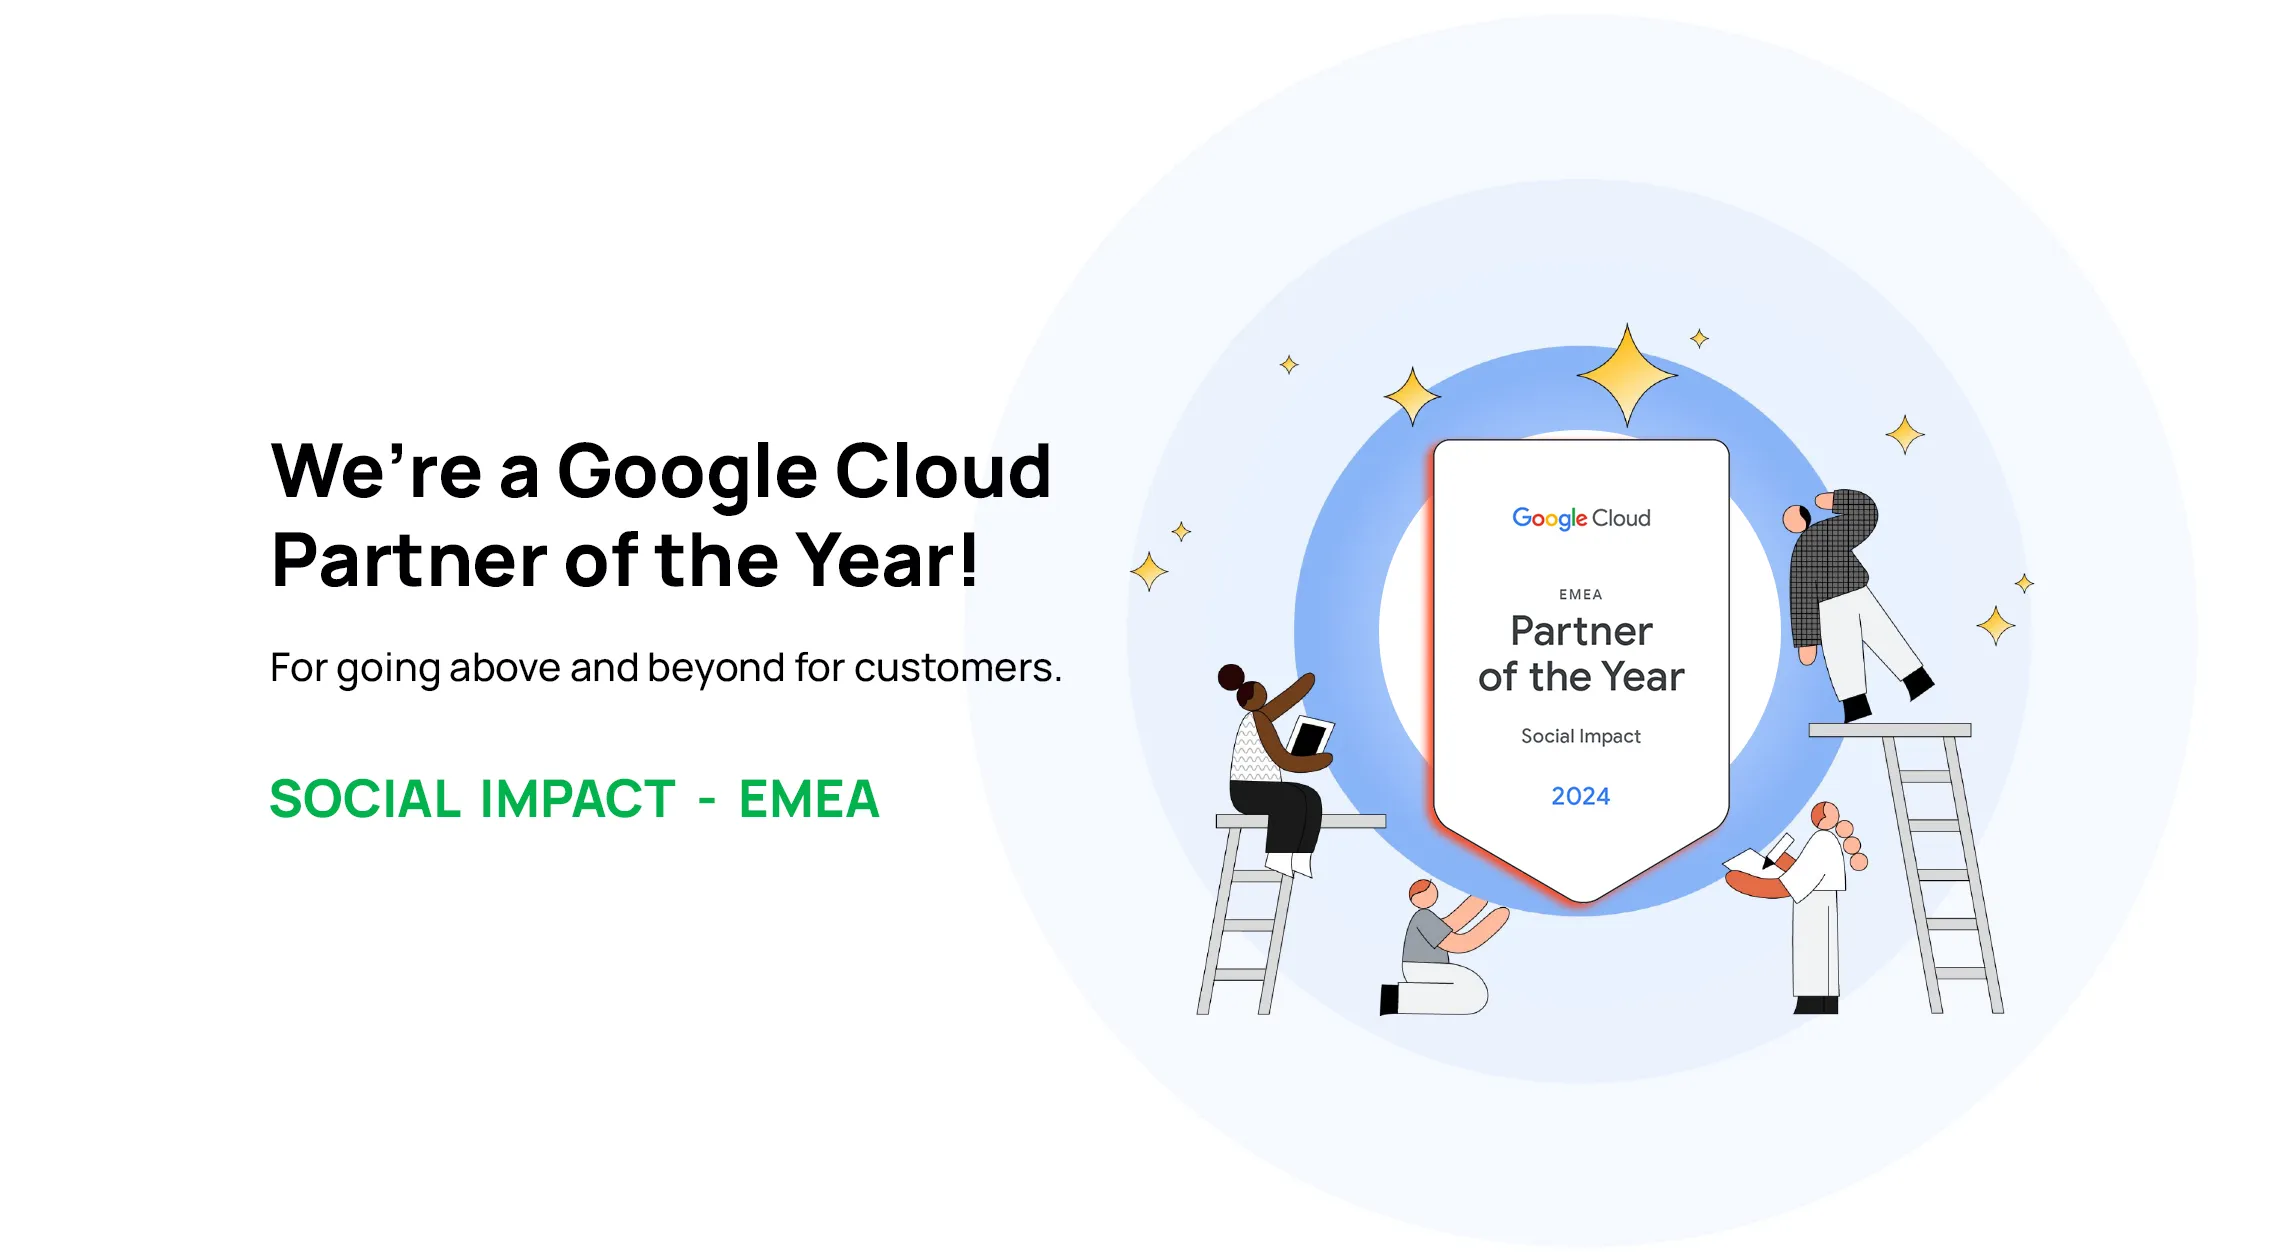 Zitec Receives EMEA Recognition for Social Impact with Google Cloud